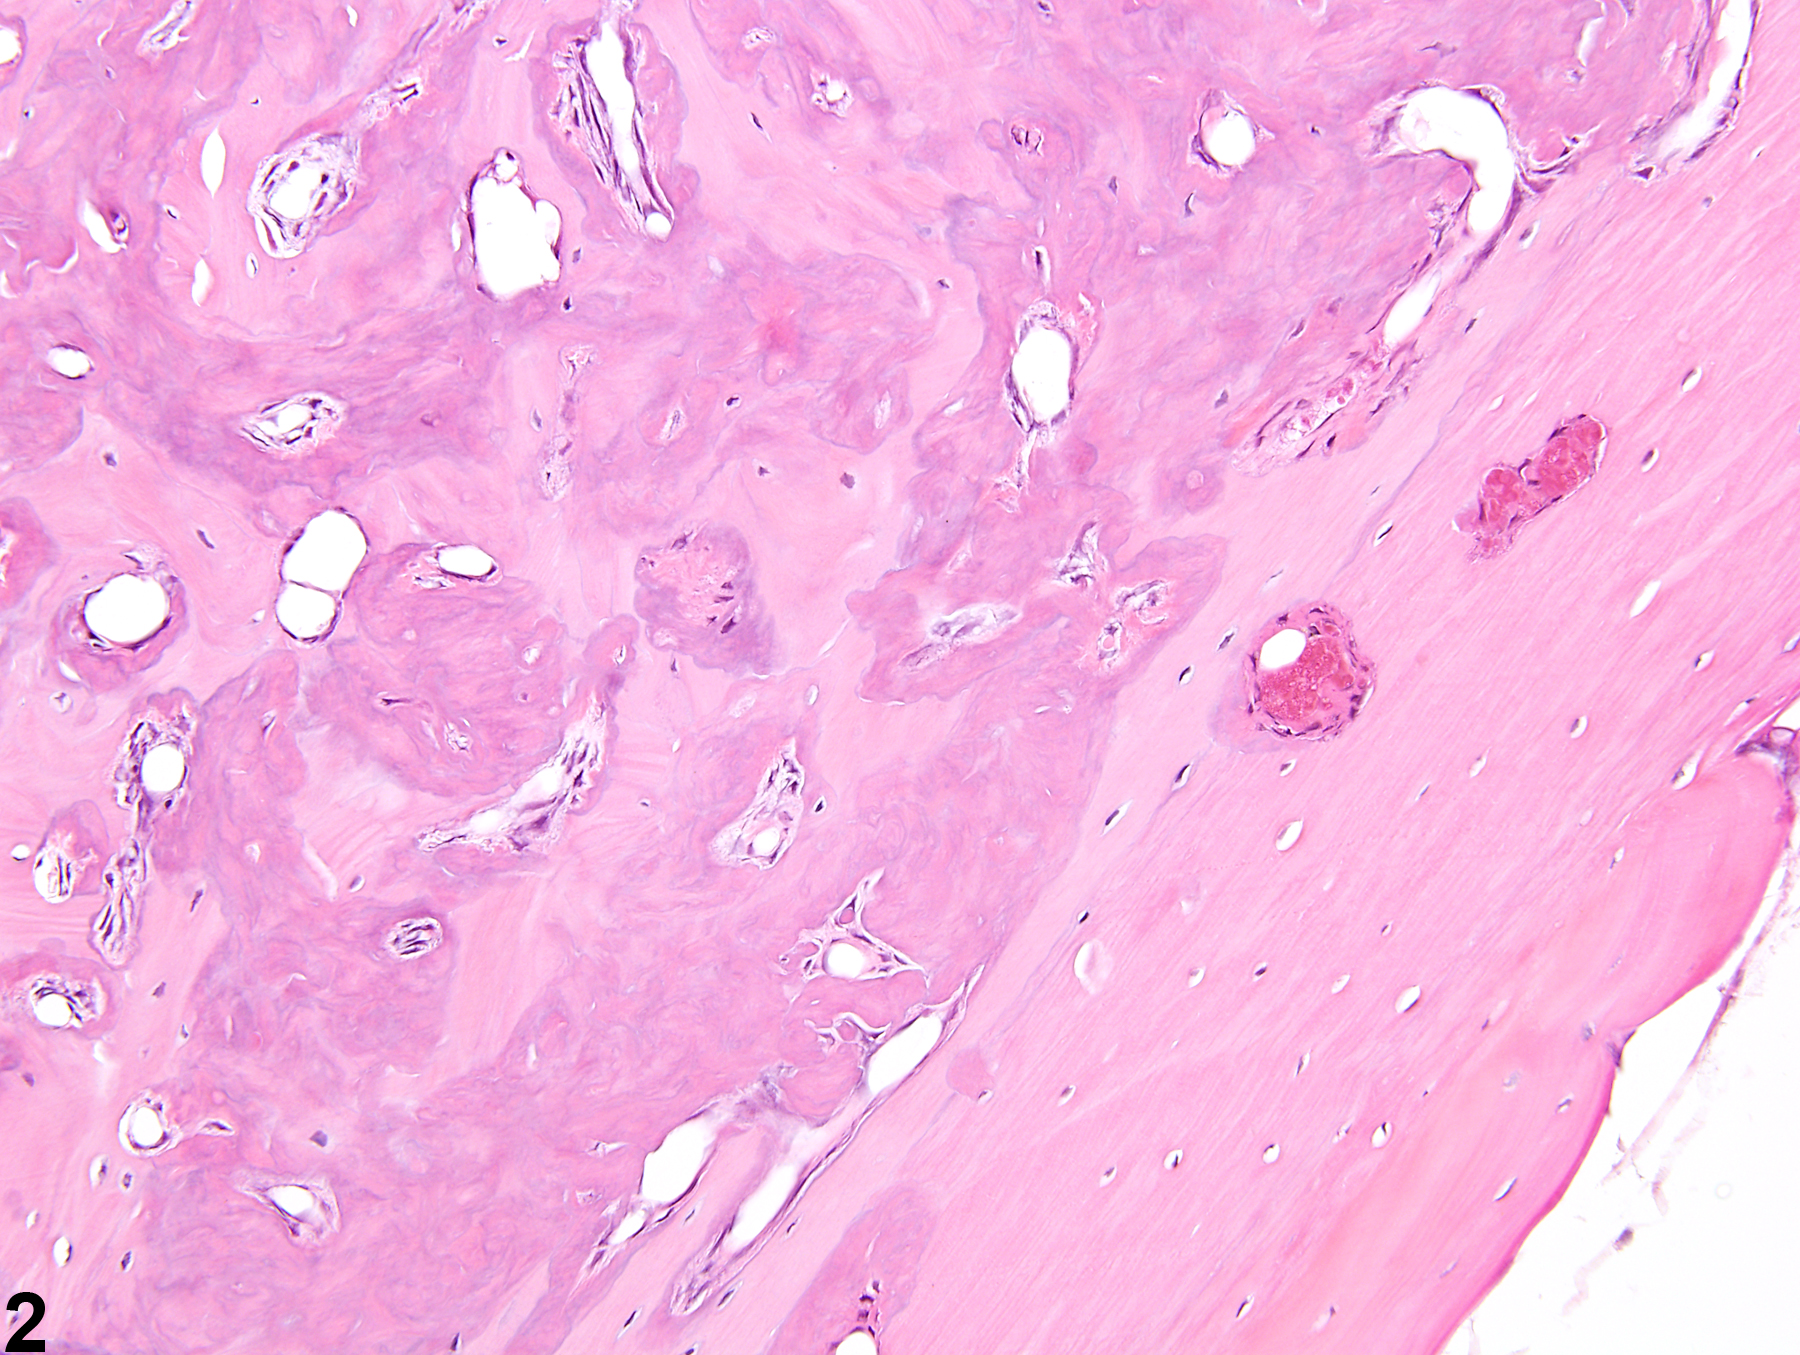 Image of increased bone in the bone from a female B6C3F1/N mouse in a chronic study